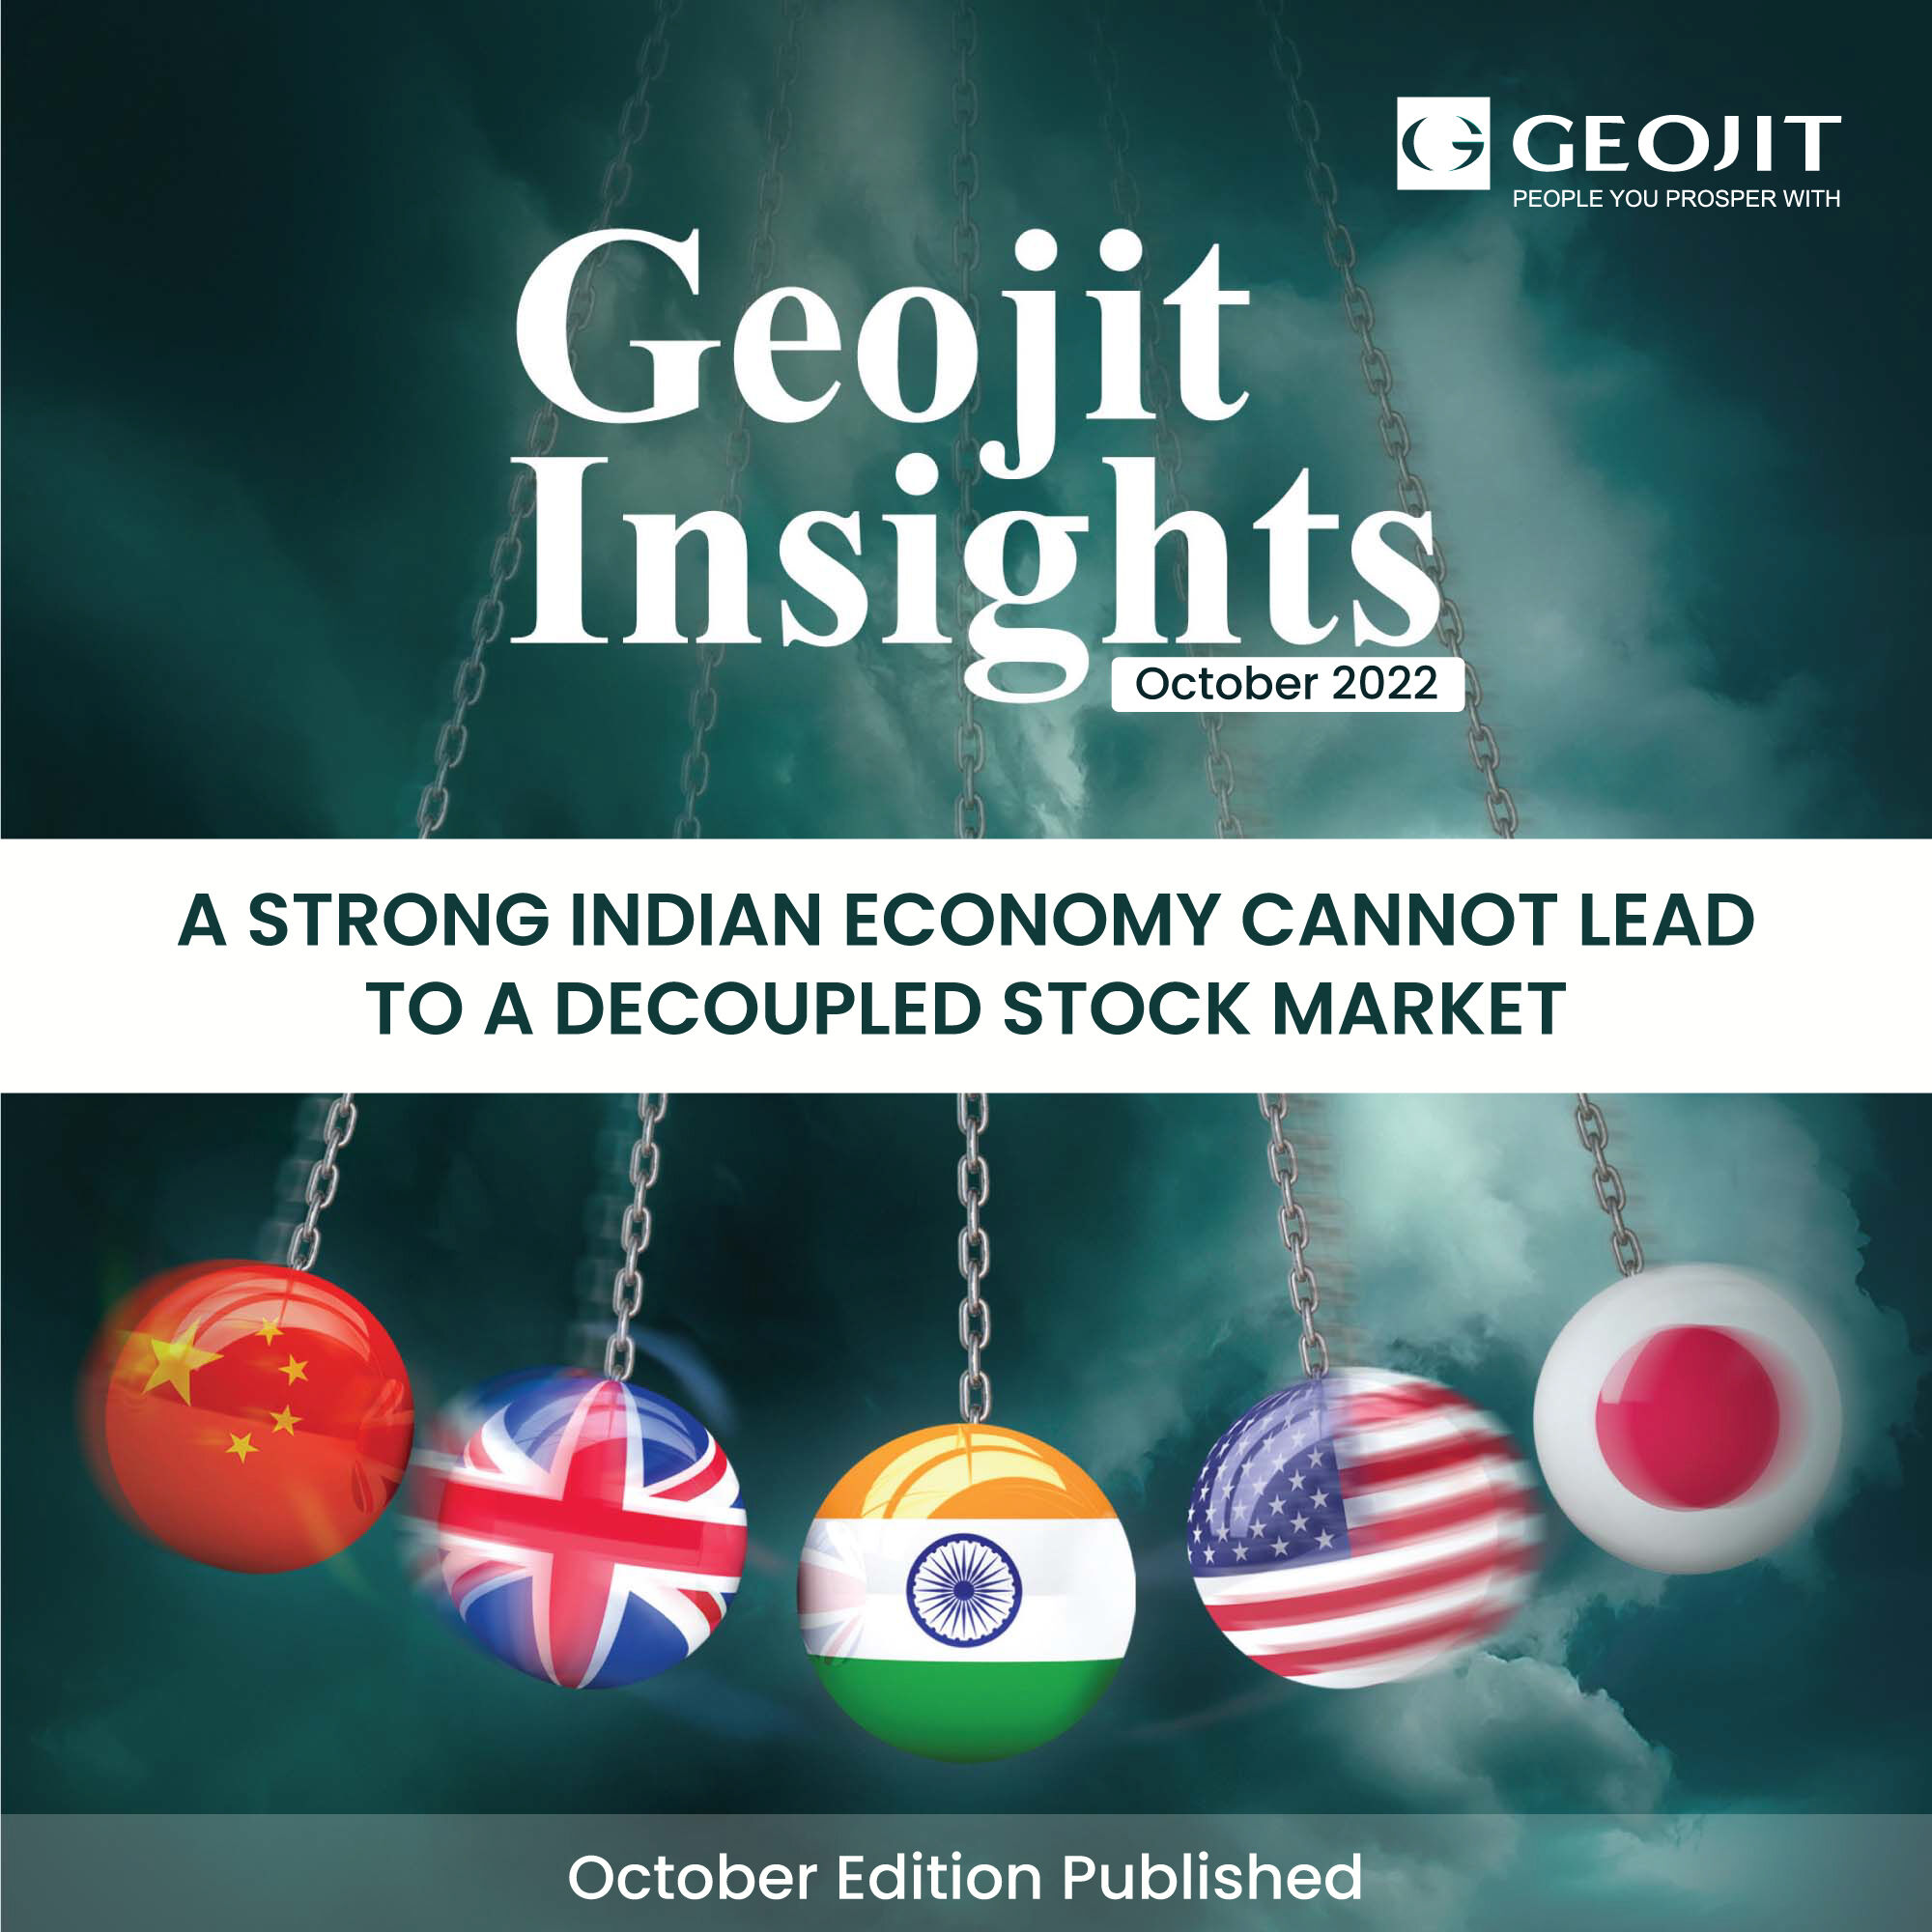 Geojit Financial Services|IT Services|Professional Services